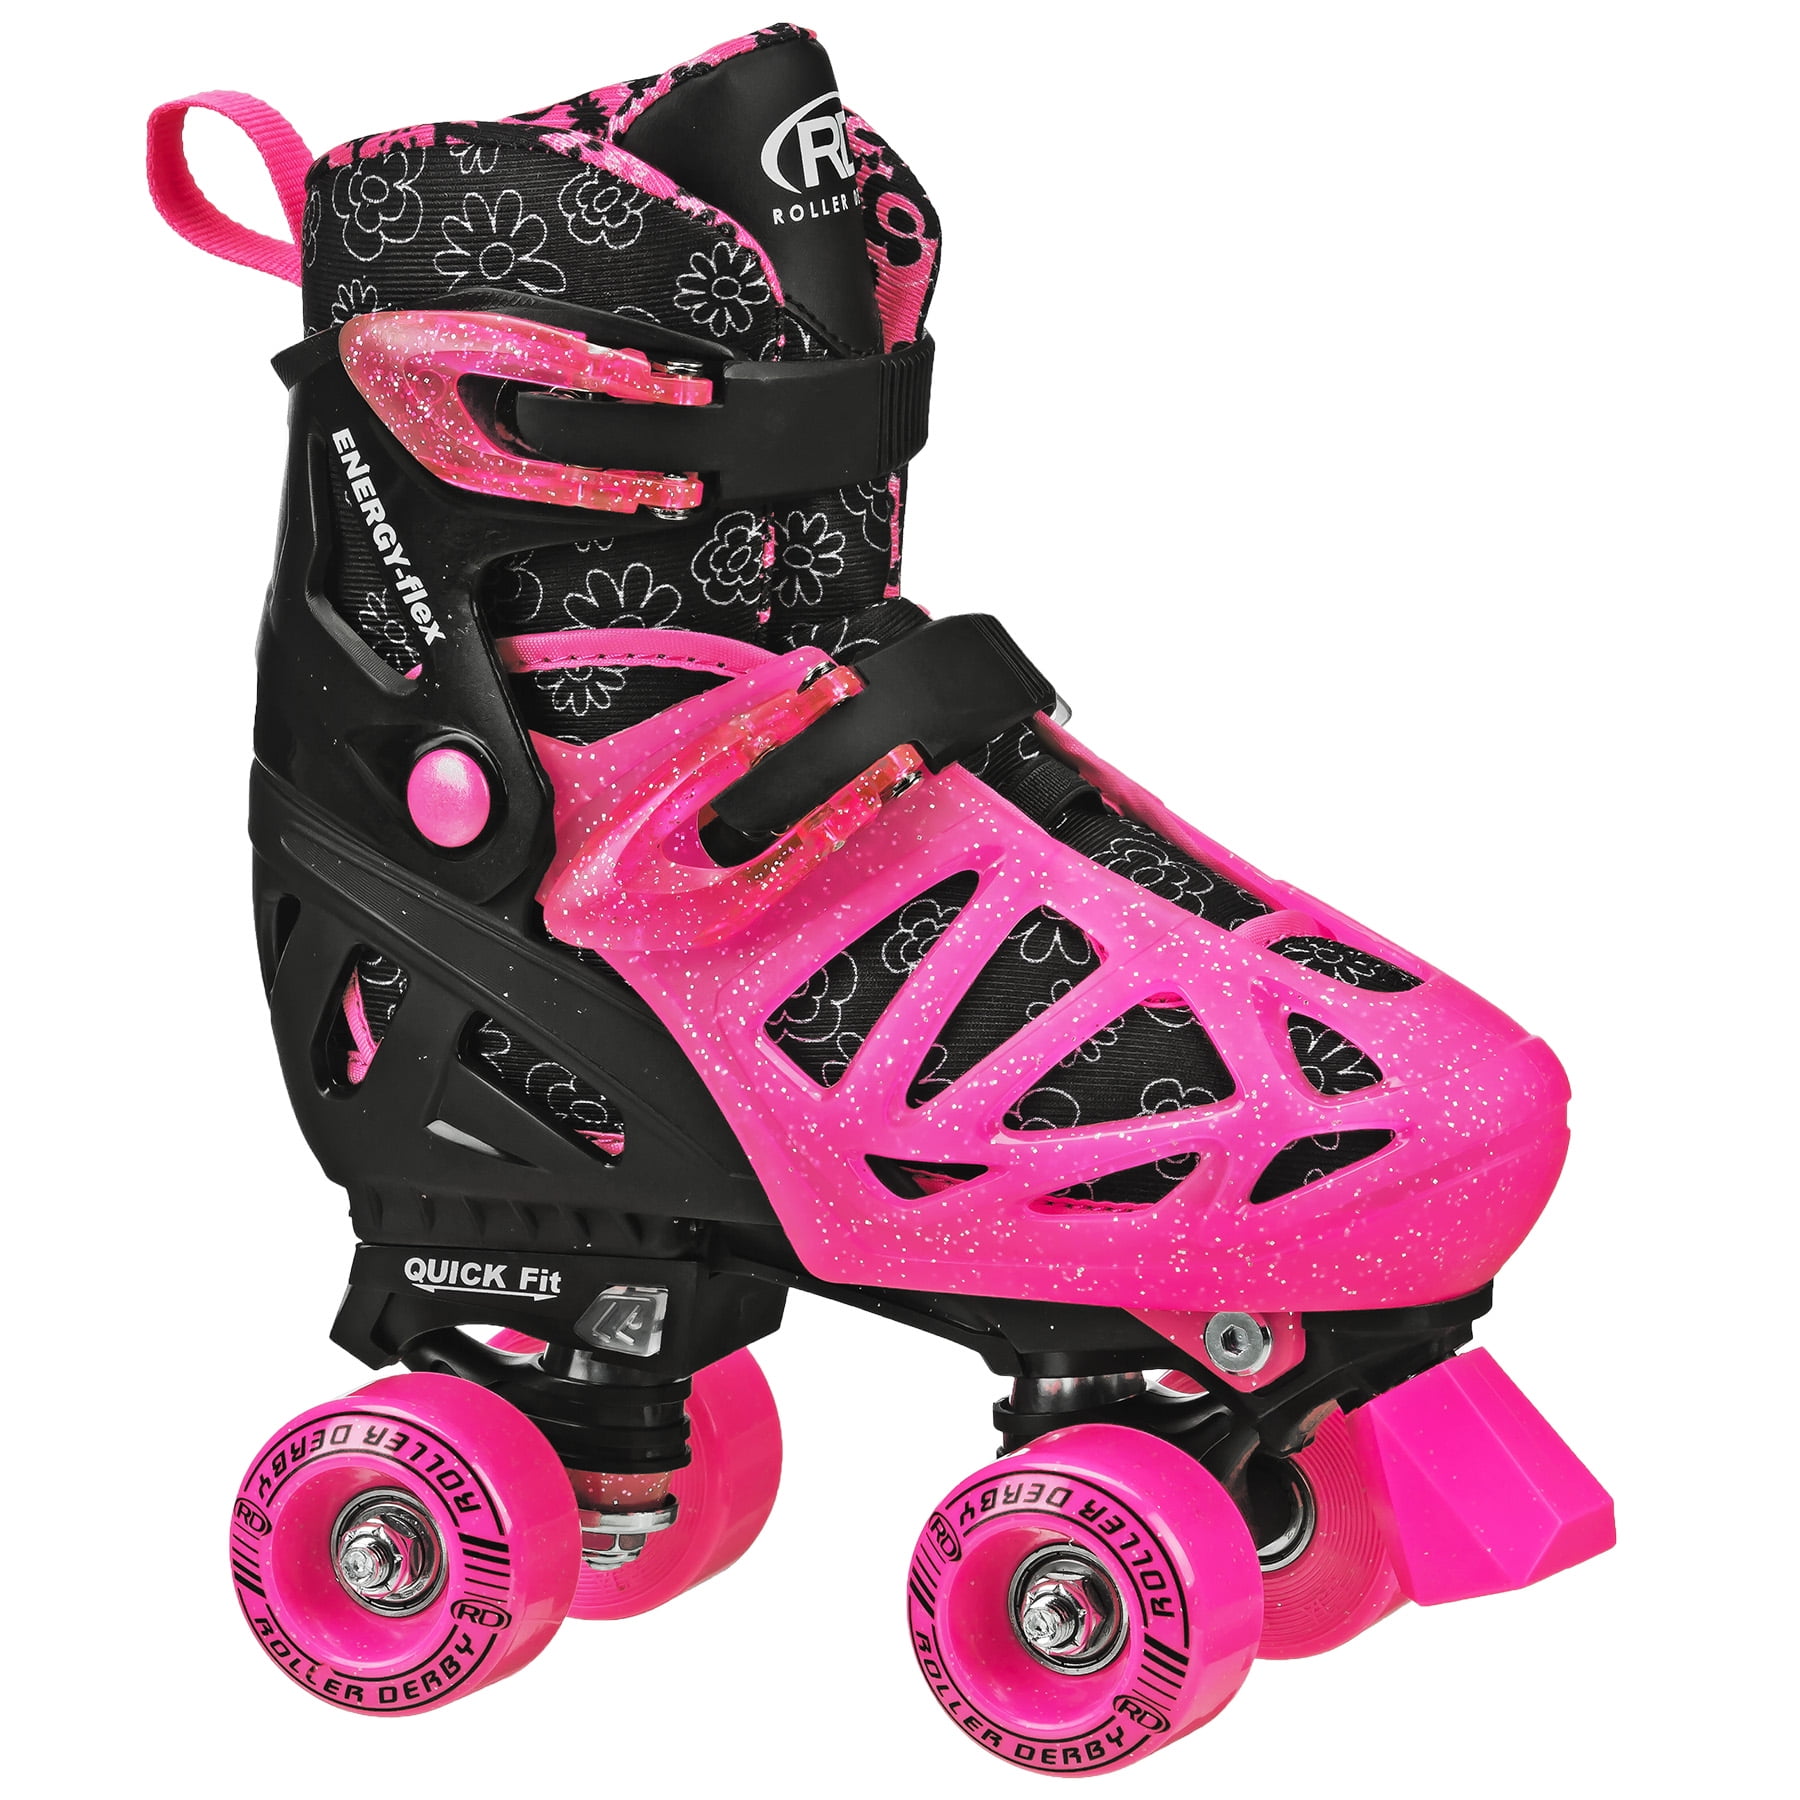 Details about   Roller Skate for Women Size 4.5 Diamond for Adult and Kids Derby Light Quad 